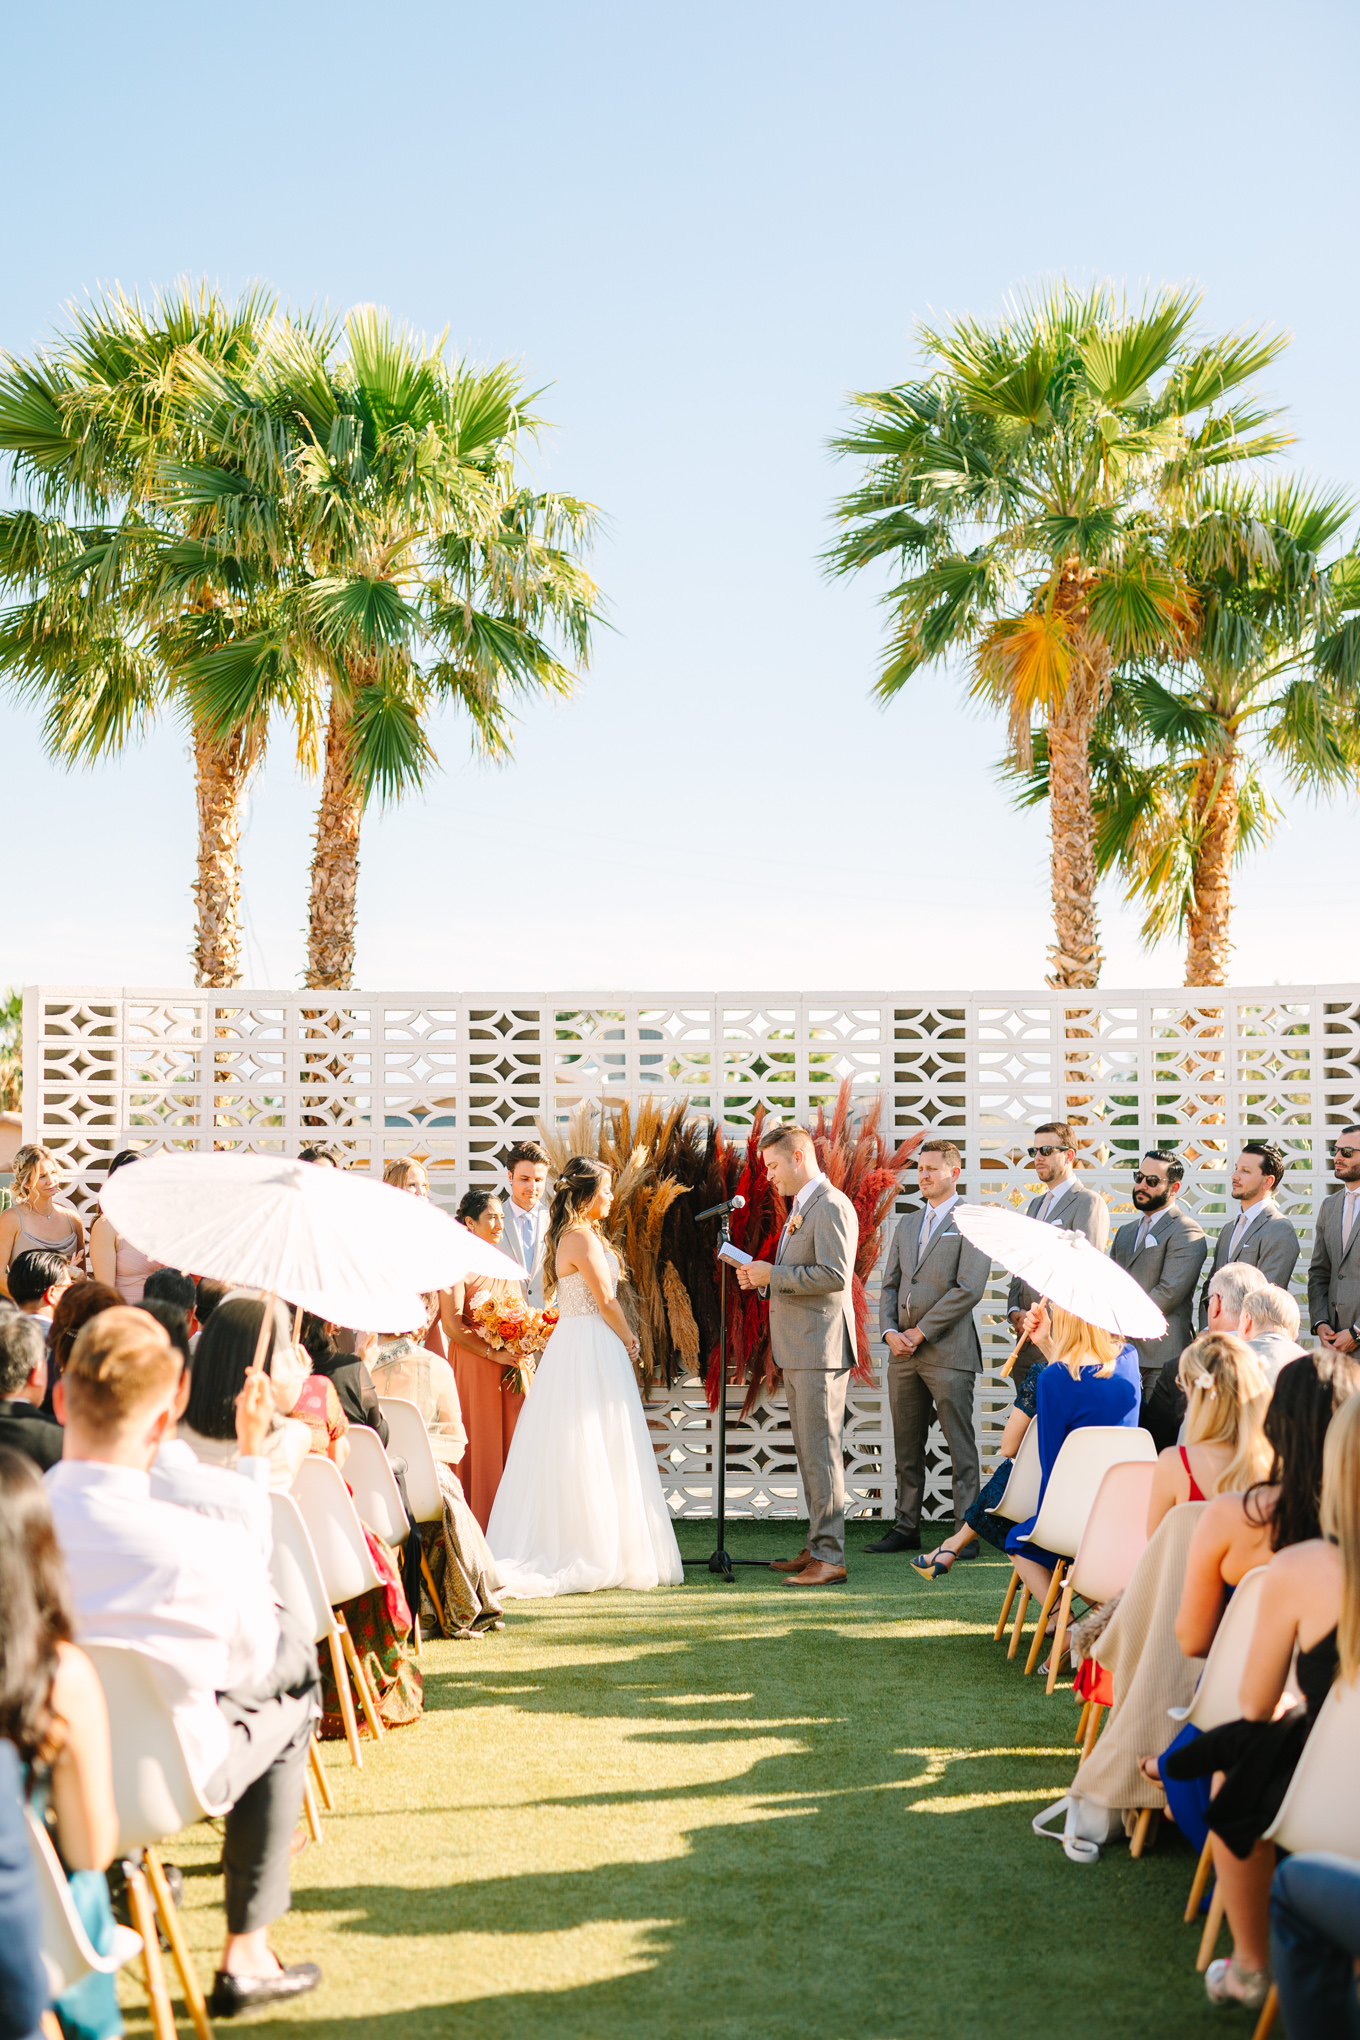 Wedding ceremony among palm trees | Pink and orange Lautner Compound wedding | Colorful Palm Springs wedding photography | #palmspringsphotographer #palmspringswedding #lautnercompound #southerncaliforniawedding  Source: Mary Costa Photography | Los Angeles